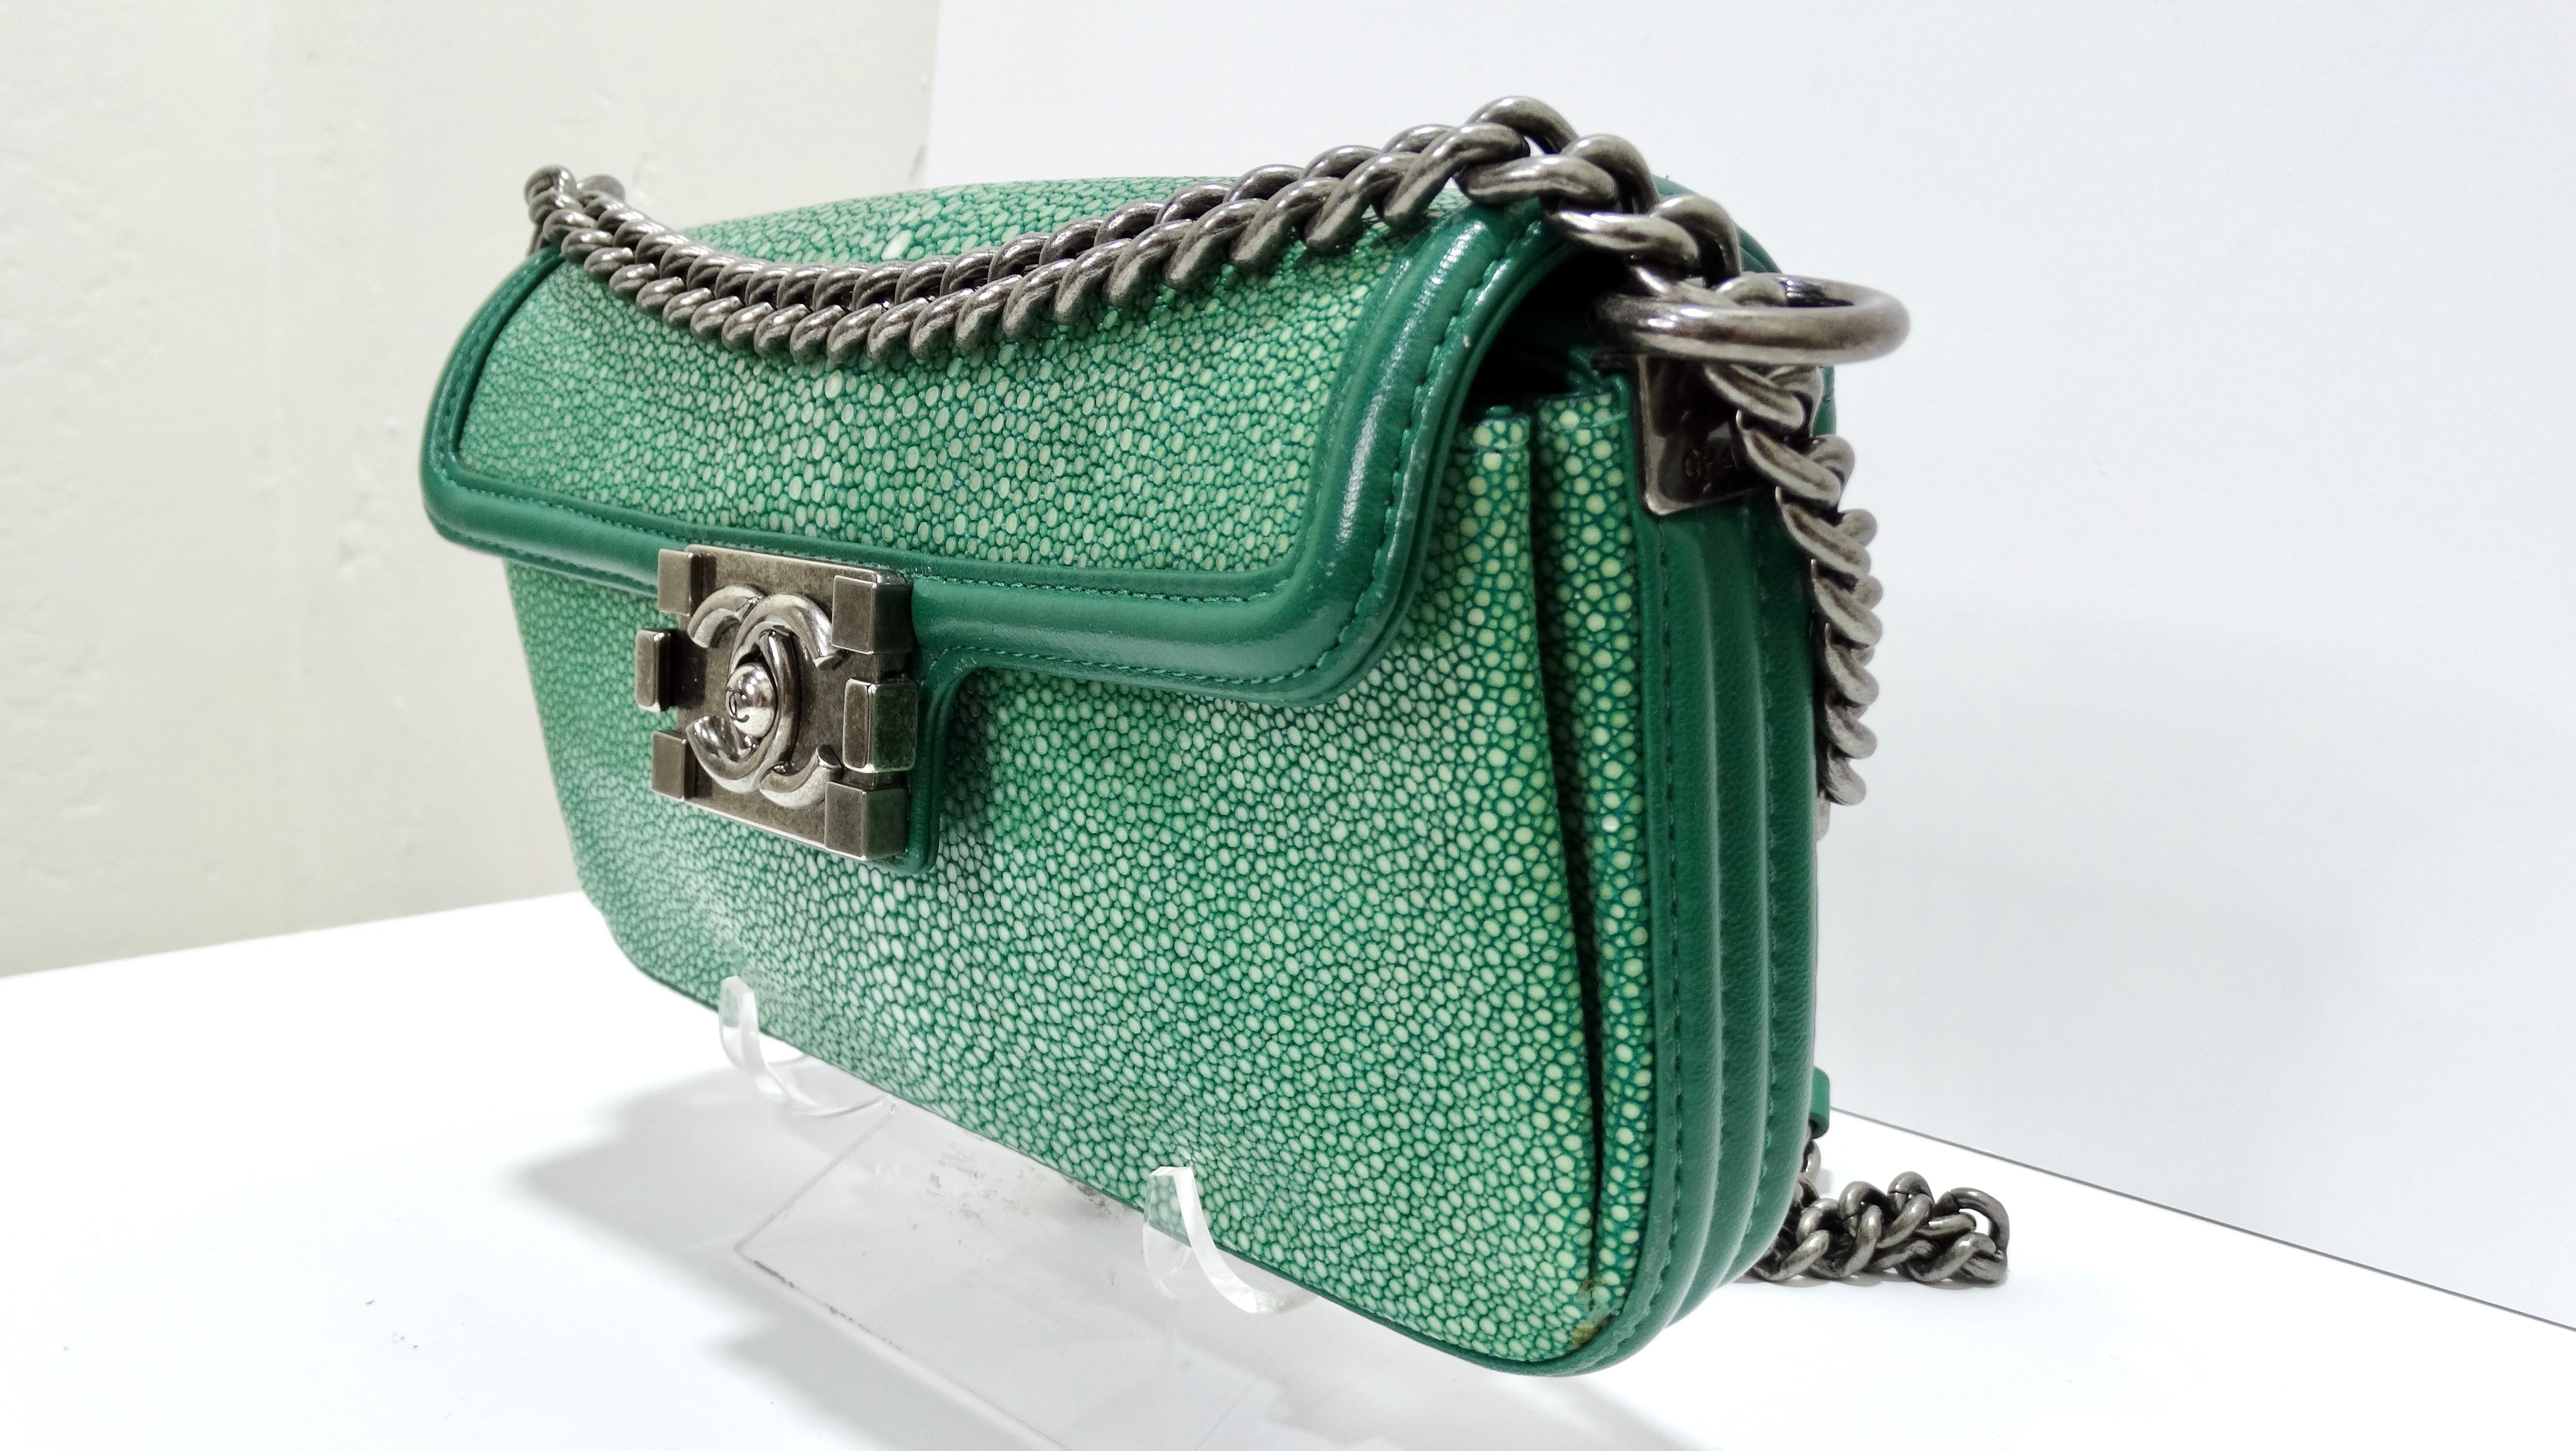 Can you even believe this?! No one can tell me that there is a better green color! And to pair with a classic Chanel Stingray style, there is no better pair. Drift from your neutral bags you already have in your closet and snag this beautiful bag.